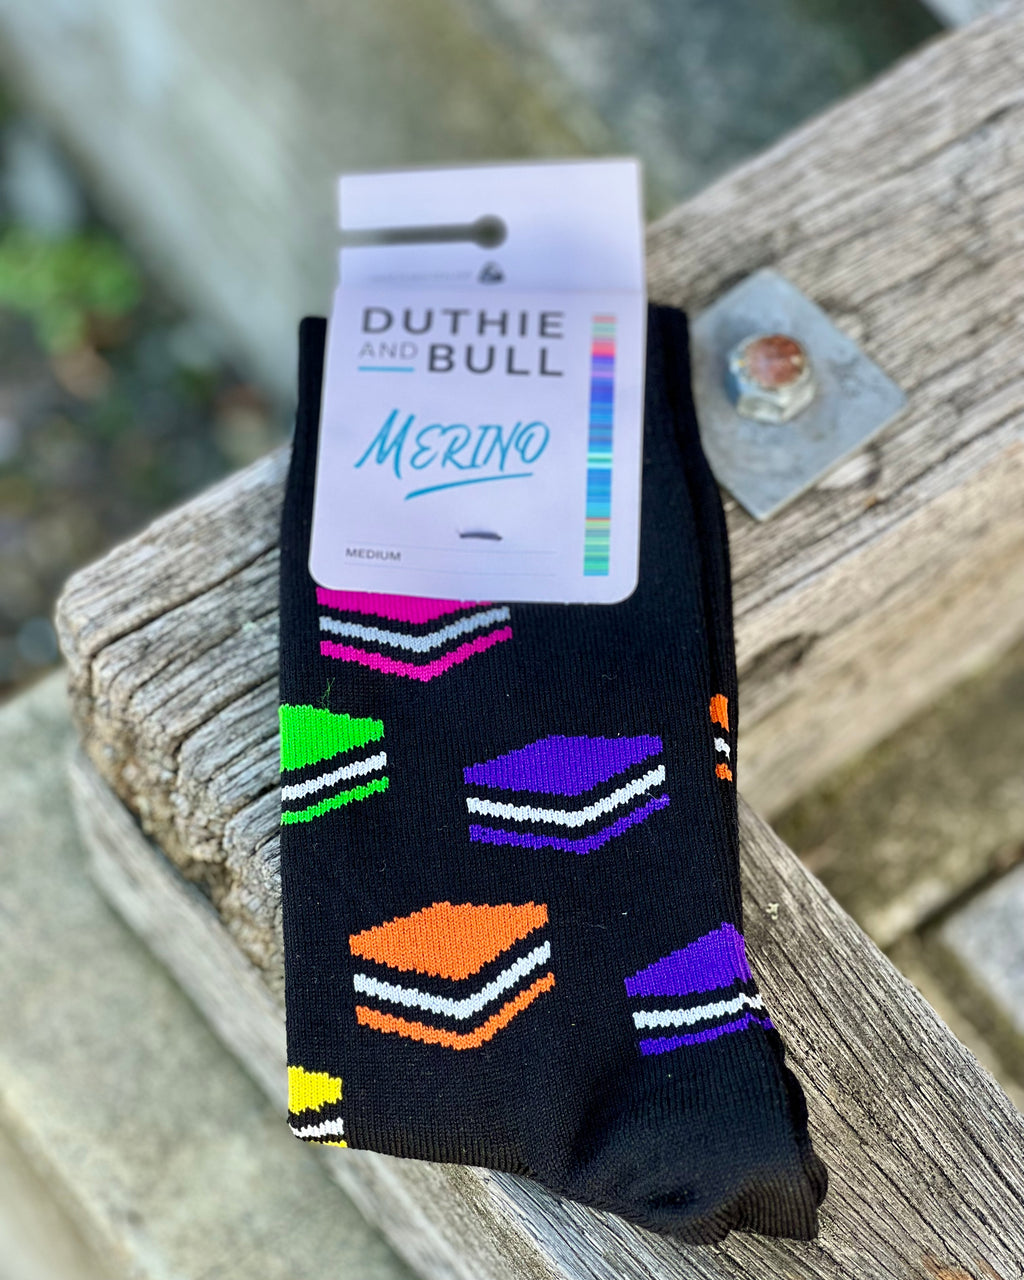 Black merino-mix mens socks with Allsorts motif by Duthie and Bull